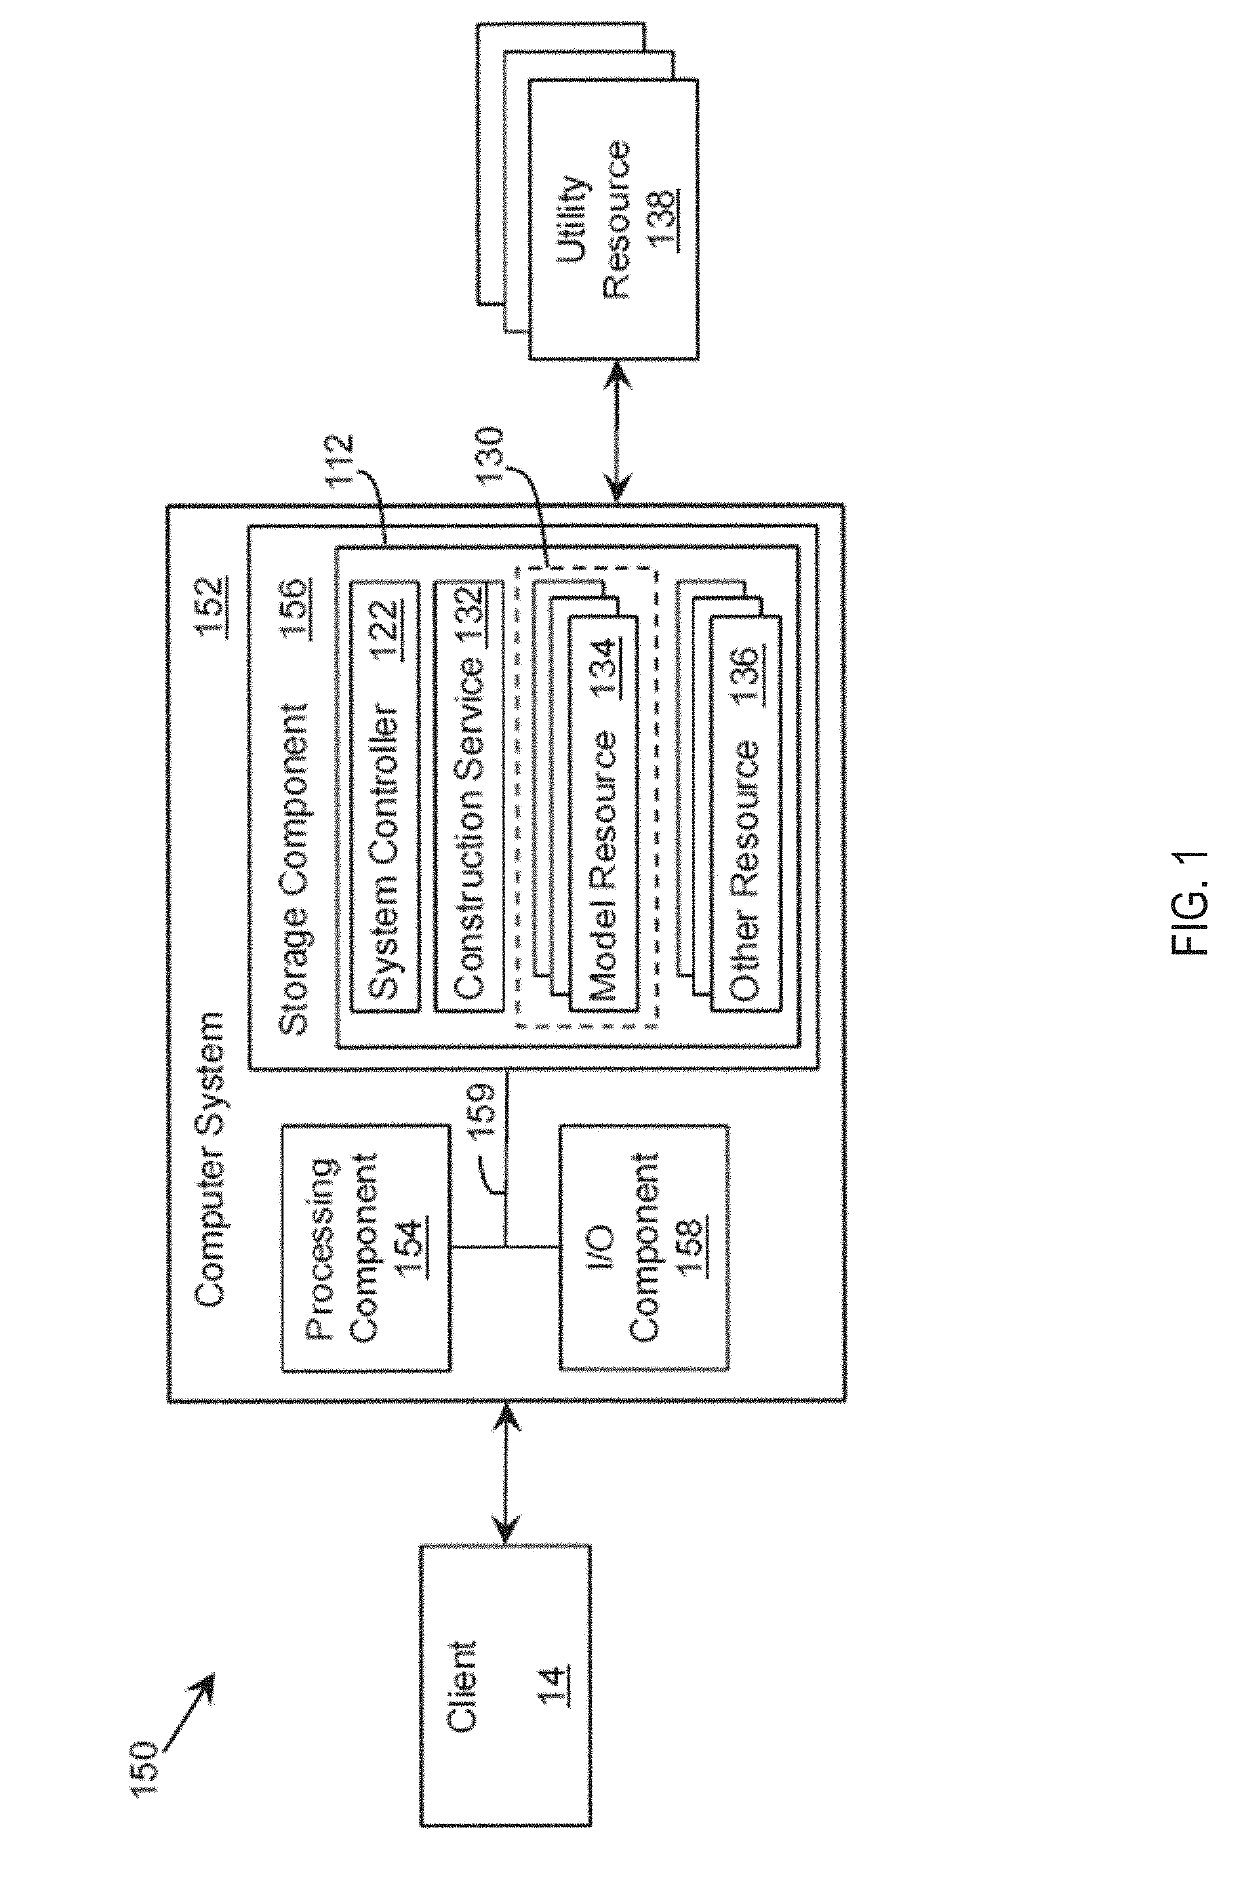 Systems and methods for domain-driven design and execution of modular and dynamic services, applications and processes